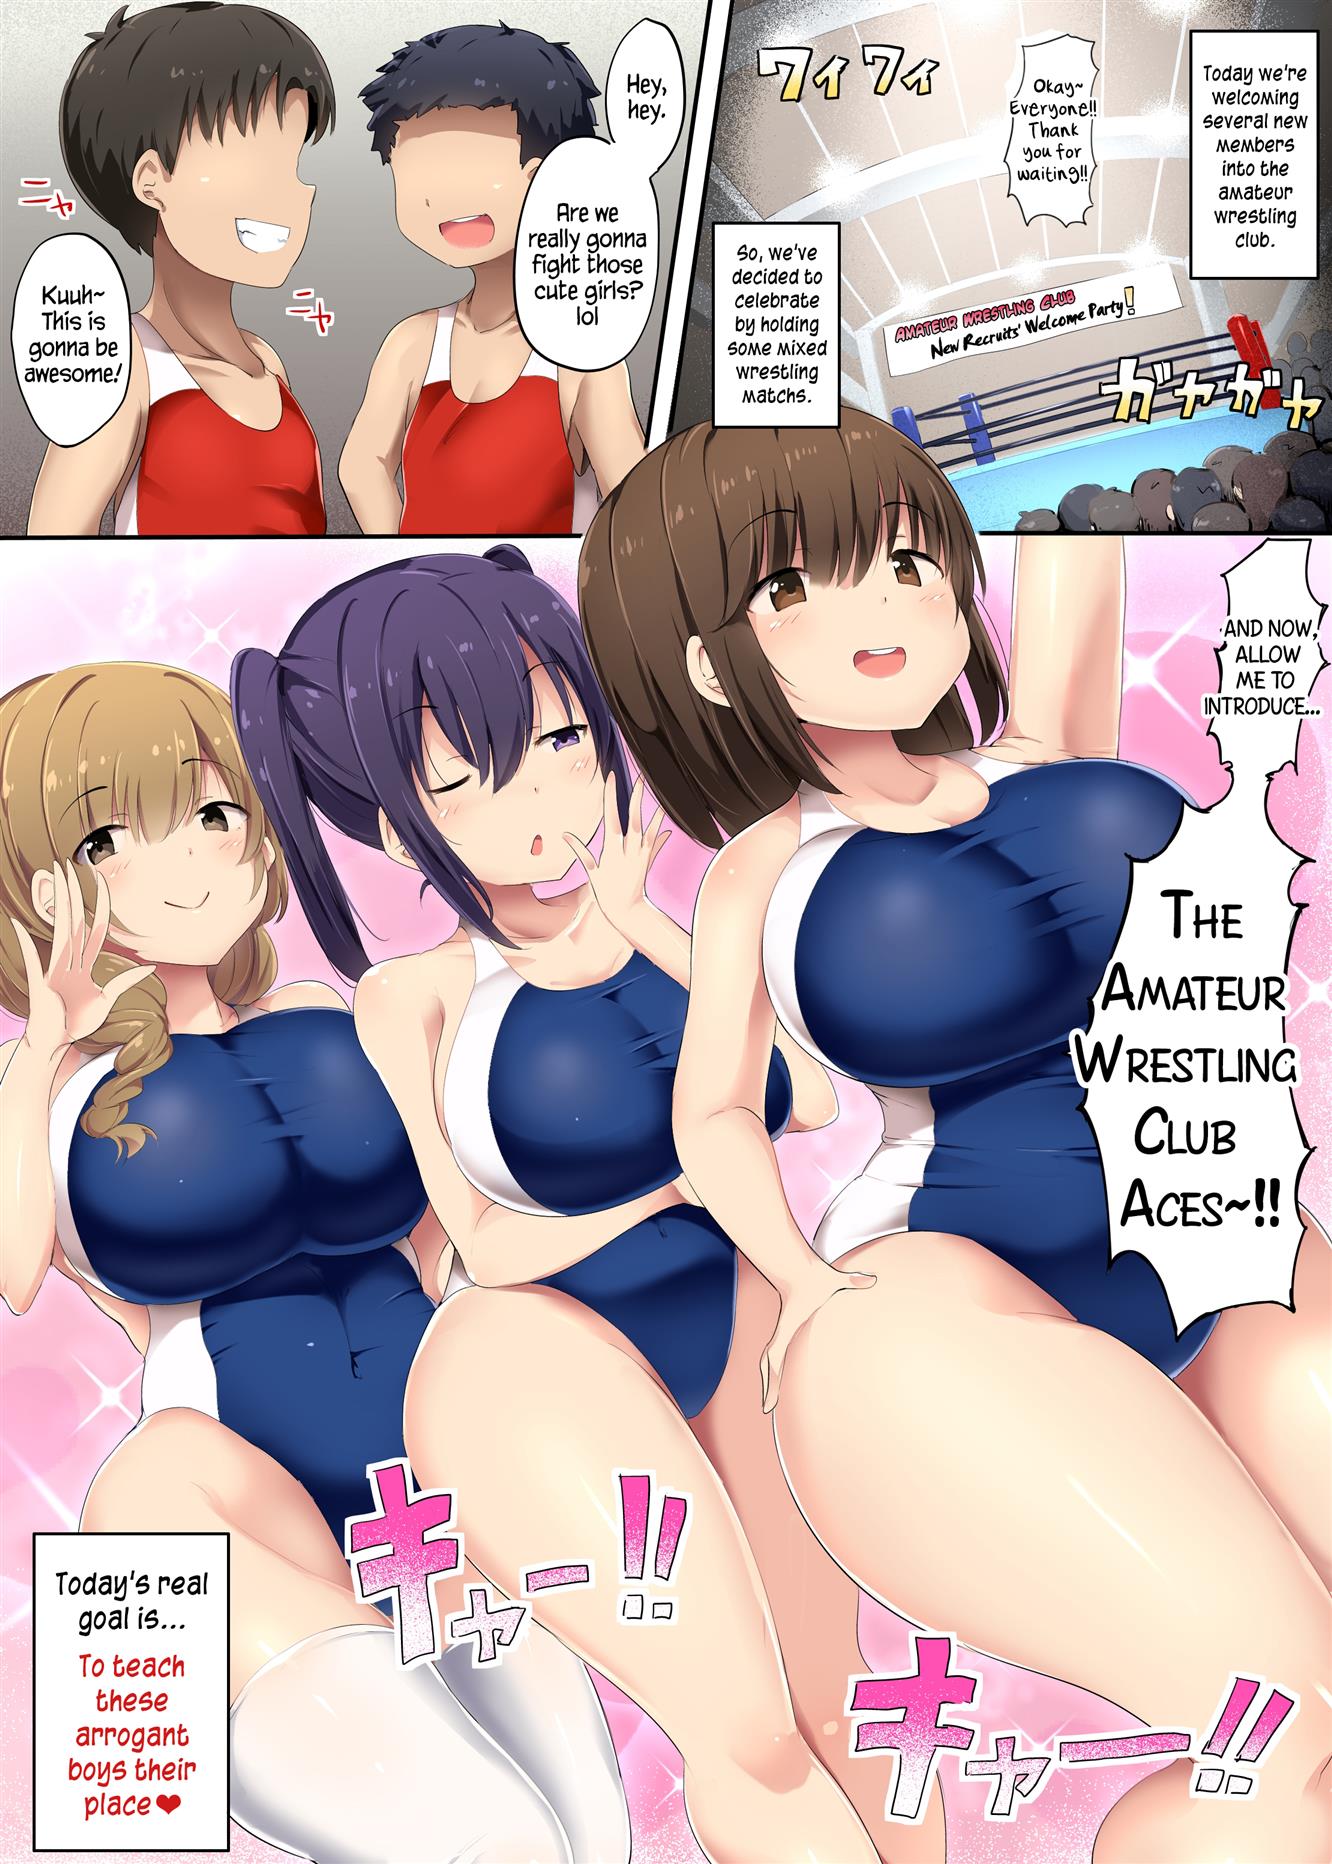 Guide on How to Completely Defeat Boys ~Stories of the Amateur Wrestling Club~